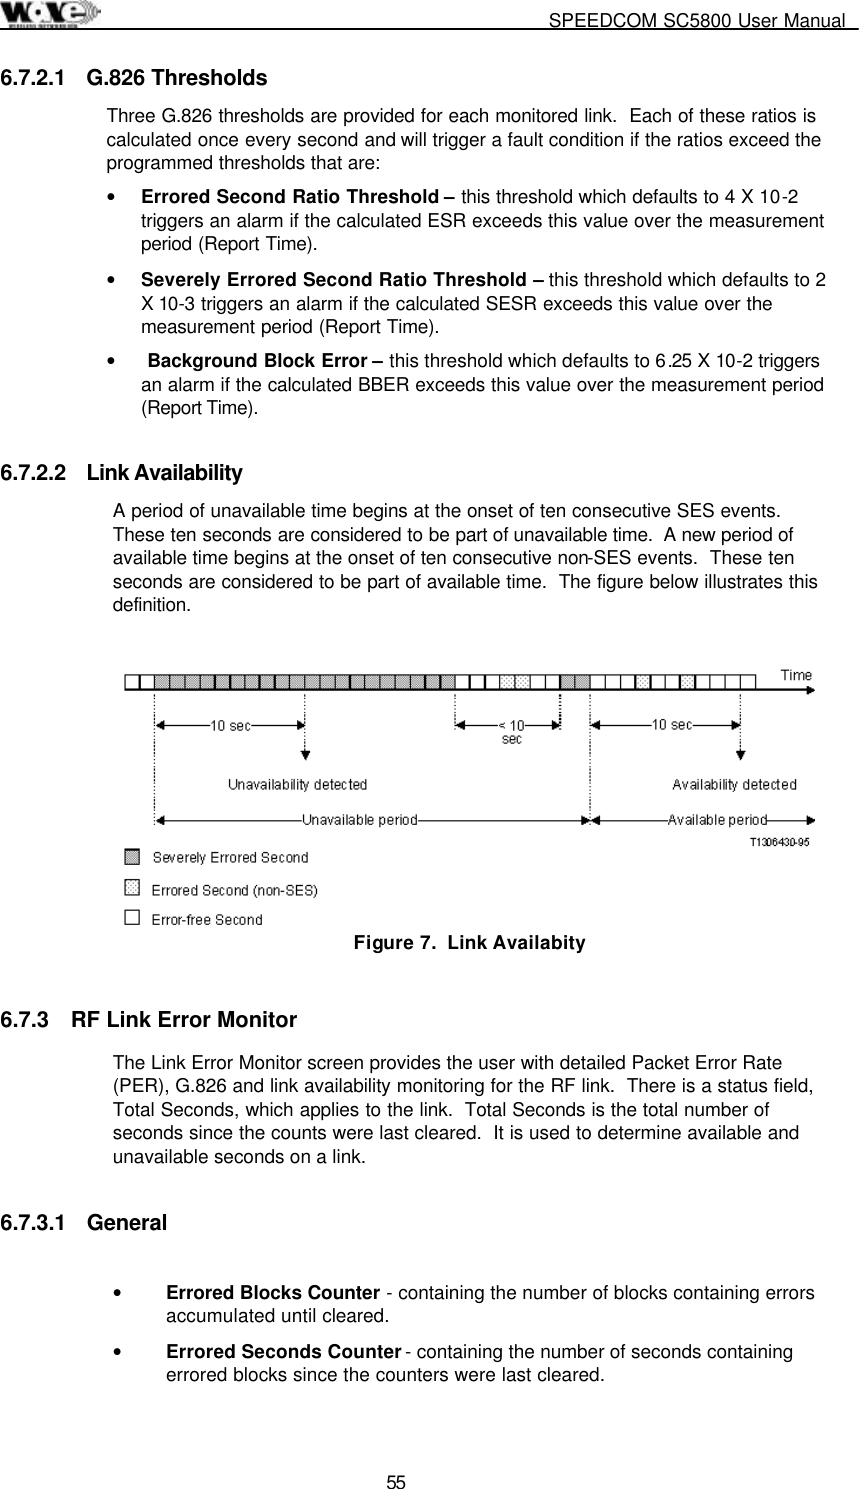     SPEEDCOM SC5800 User Manual  55 6.7.2.1 G.826 Thresholds Three G.826 thresholds are provided for each monitored link.  Each of these ratios is calculated once every second and will trigger a fault condition if the ratios exceed the programmed thresholds that are: •  Errored Second Ratio Threshold – this threshold which defaults to 4 X 10-2 triggers an alarm if the calculated ESR exceeds this value over the measurement period (Report Time). •  Severely Errored Second Ratio Threshold – this threshold which defaults to 2 X 10-3 triggers an alarm if the calculated SESR exceeds this value over the measurement period (Report Time). •   Background Block Error – this threshold which defaults to 6.25 X 10-2 triggers an alarm if the calculated BBER exceeds this value over the measurement period (Report Time).  6.7.2.2  Link Availability A period of unavailable time begins at the onset of ten consecutive SES events.  These ten seconds are considered to be part of unavailable time.  A new period of available time begins at the onset of ten consecutive non-SES events.  These ten seconds are considered to be part of available time.  The figure below illustrates this definition.   Figure 7.  Link Availabity 6.7.3  RF Link Error Monitor  The Link Error Monitor screen provides the user with detailed Packet Error Rate (PER), G.826 and link availability monitoring for the RF link.  There is a status field, Total Seconds, which applies to the link.  Total Seconds is the total number of seconds since the counts were last cleared.  It is used to determine available and unavailable seconds on a link. 6.7.3.1 General  •  Errored Blocks Counter - containing the number of blocks containing errors accumulated until cleared. •  Errored Seconds Counter - containing the number of seconds containing errored blocks since the counters were last cleared. 